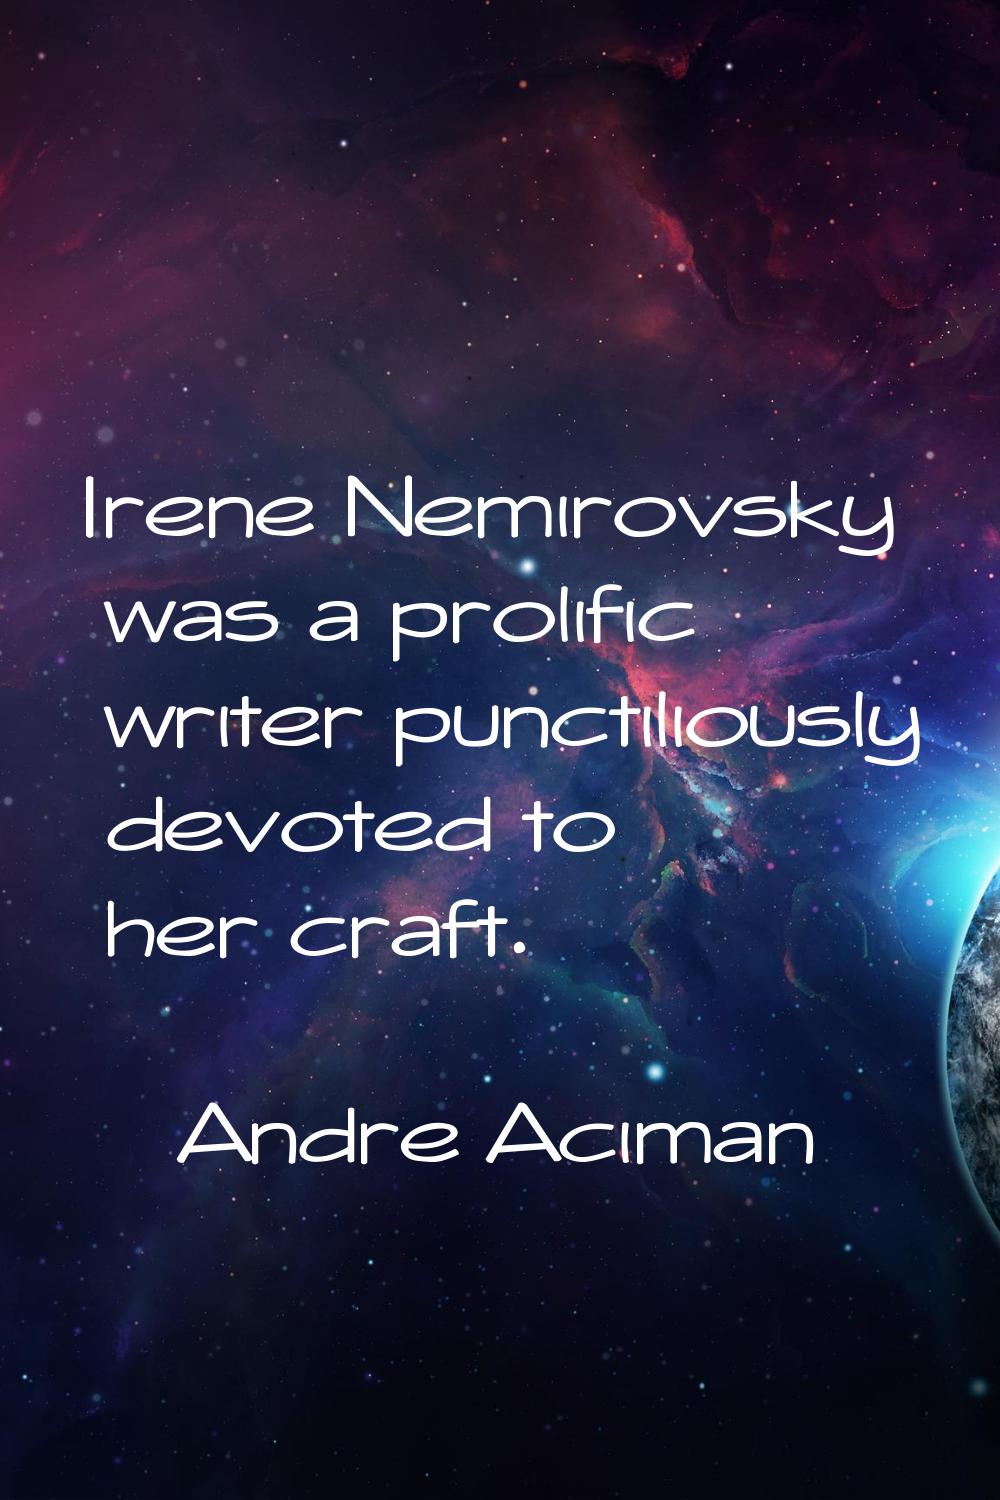 Irene Nemirovsky was a prolific writer punctiliously devoted to her craft.